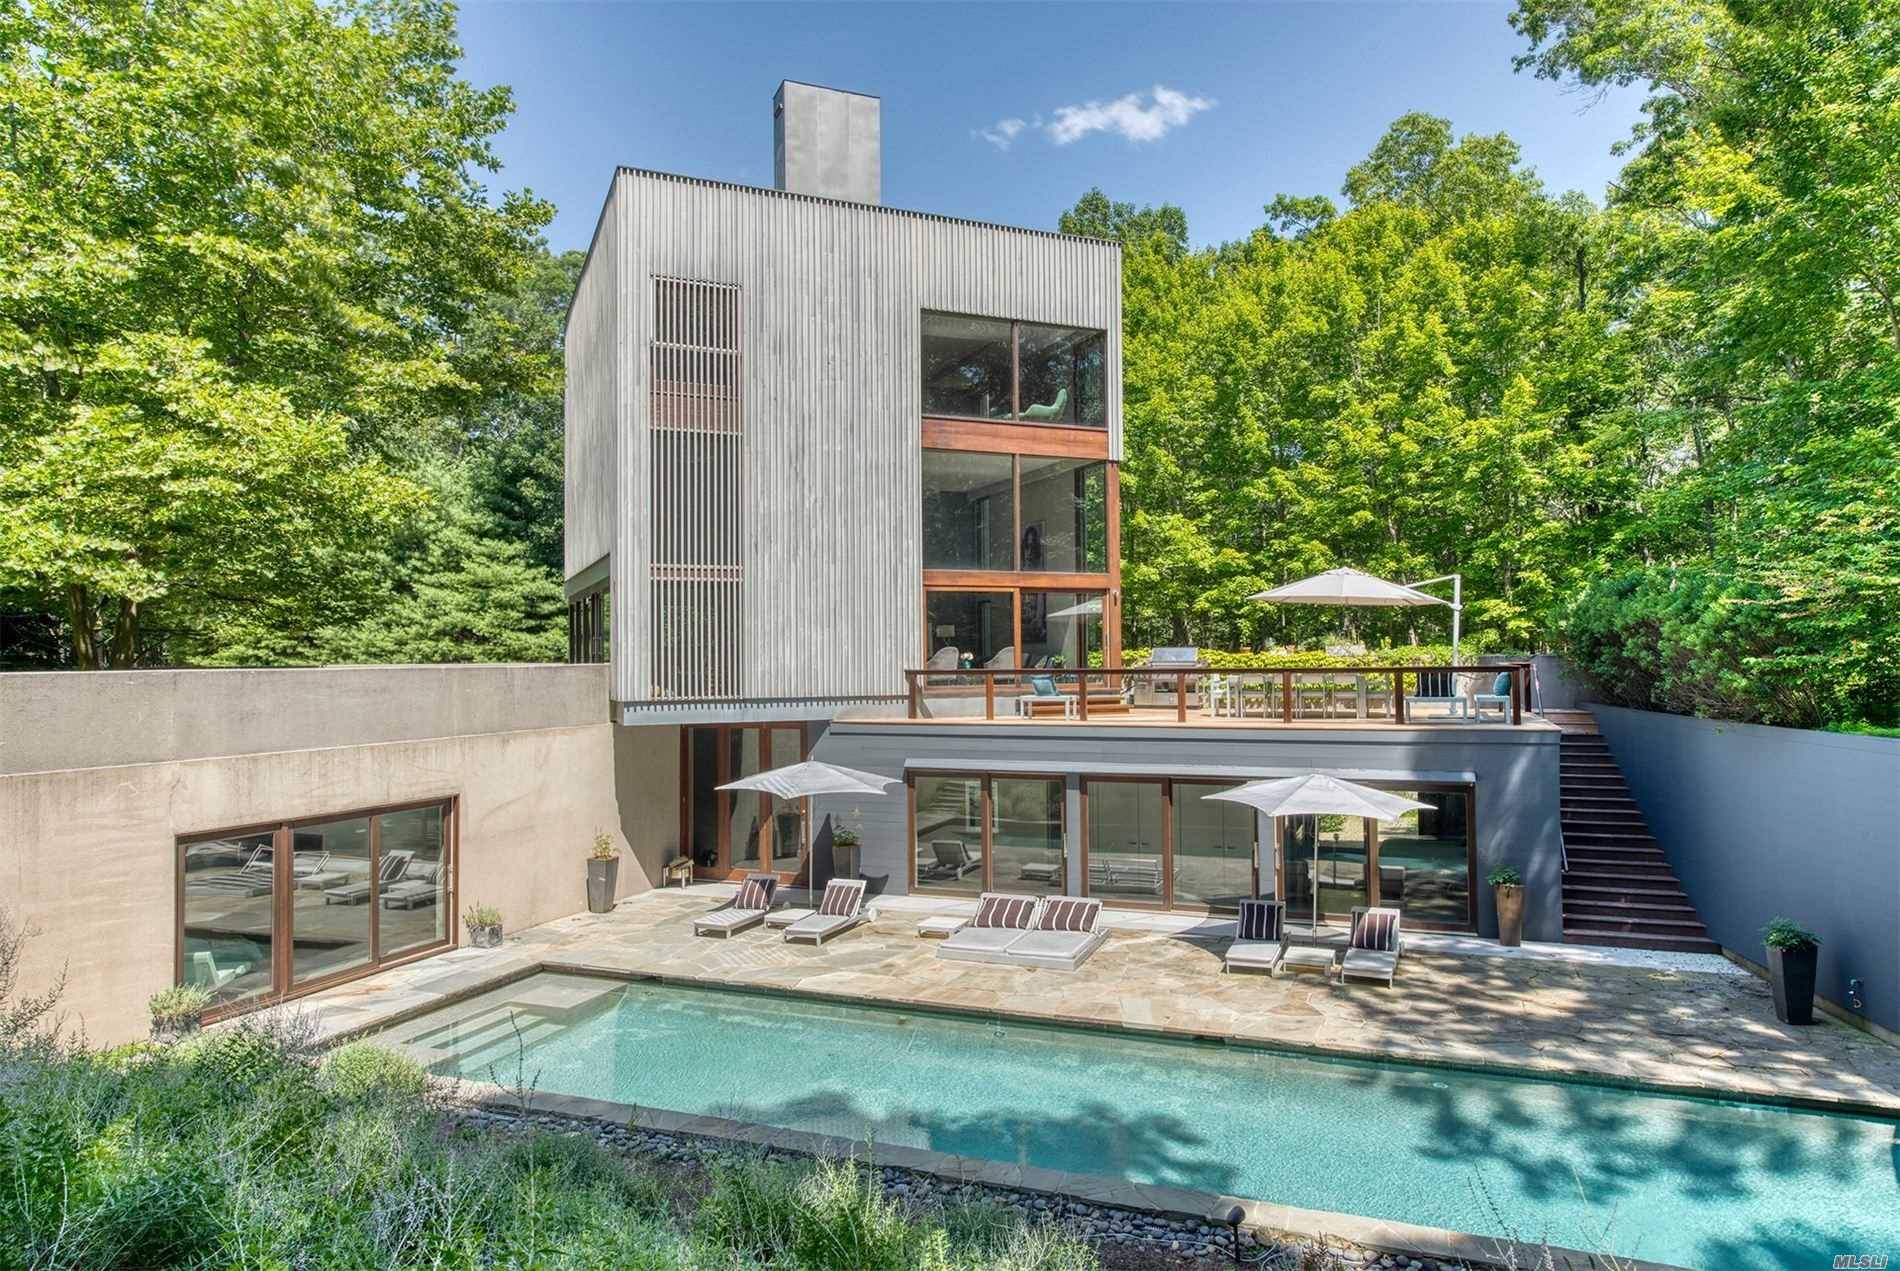 Designed by world renowned architects Calvin Tsao and Zack McKown, this stunning home is one of the original Houses at Sagaponack, the acclaimed modernist development conceived by the late Harry ...